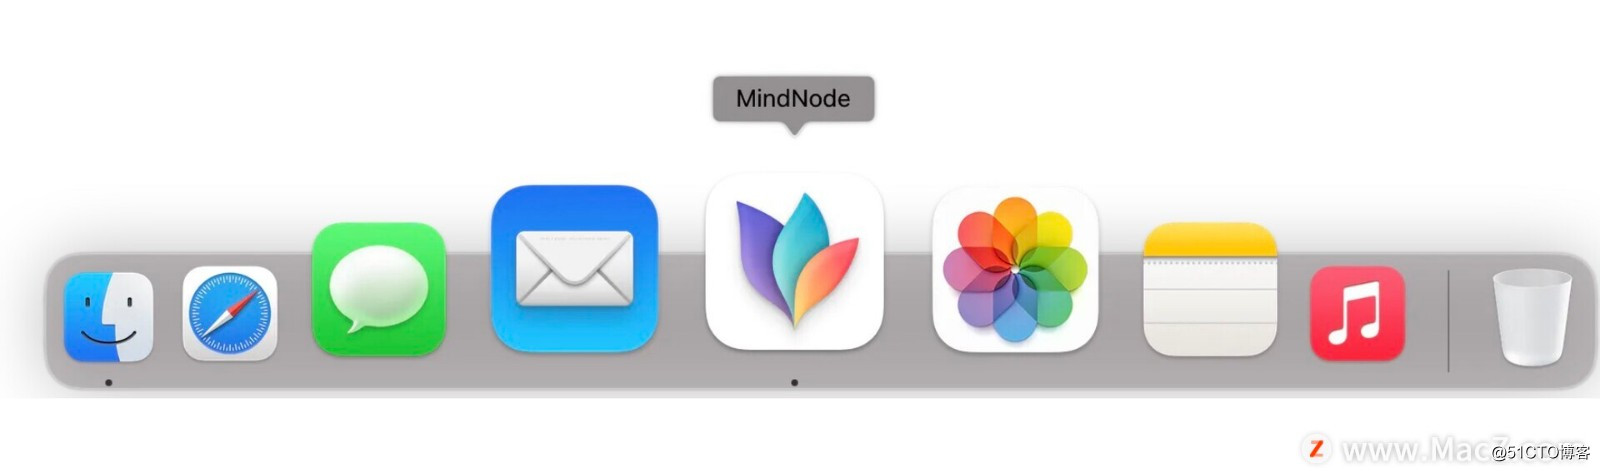 What optimization updates has MindNode made for Apple M1?